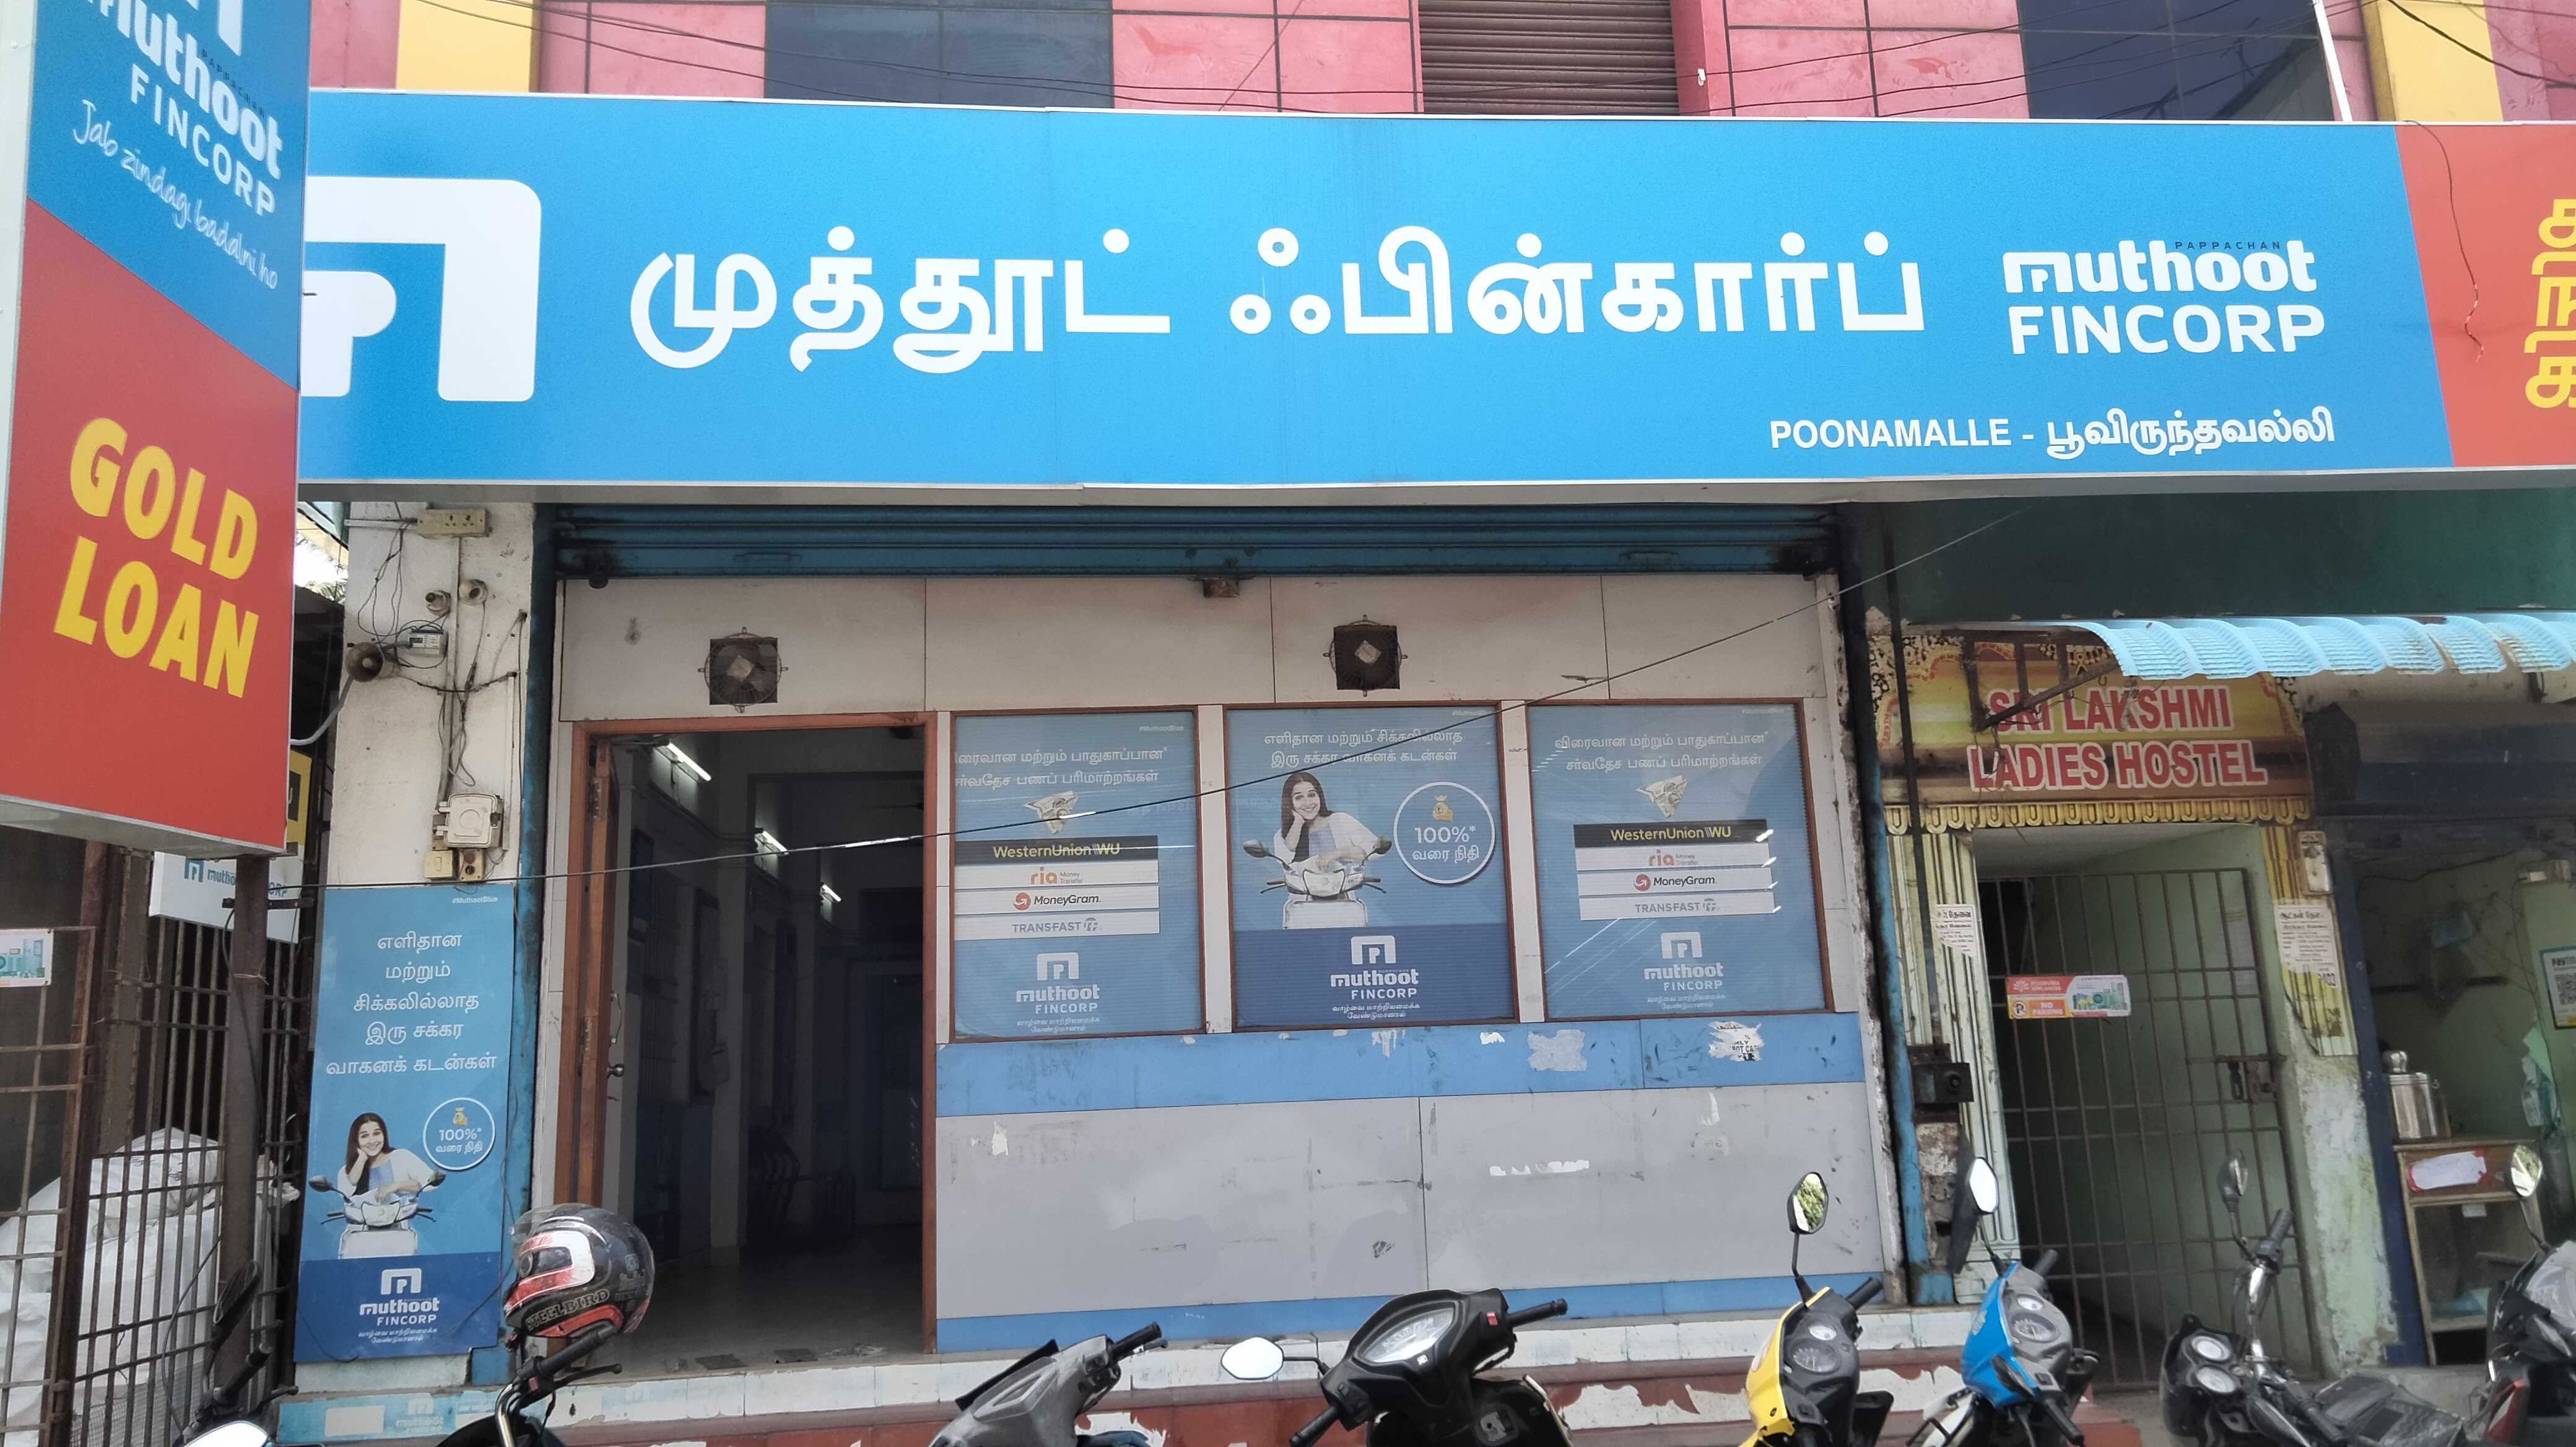 Muthoot Fincorp Gold Loan Services in Poonamallee, Chennai, Tamil Nadu